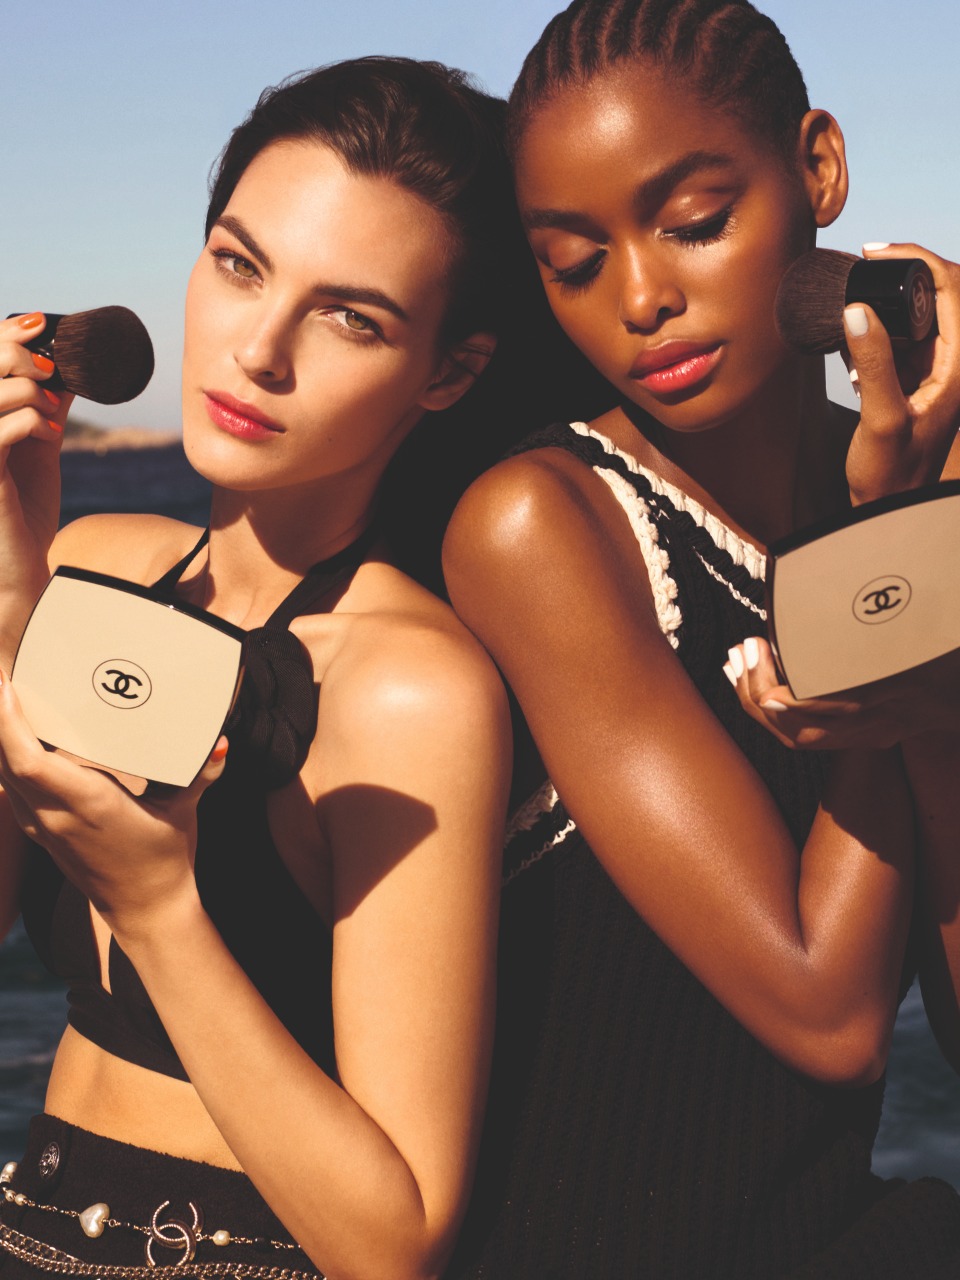 Chanel Les Beiges - Summer 2022 - The Beauty Look Book